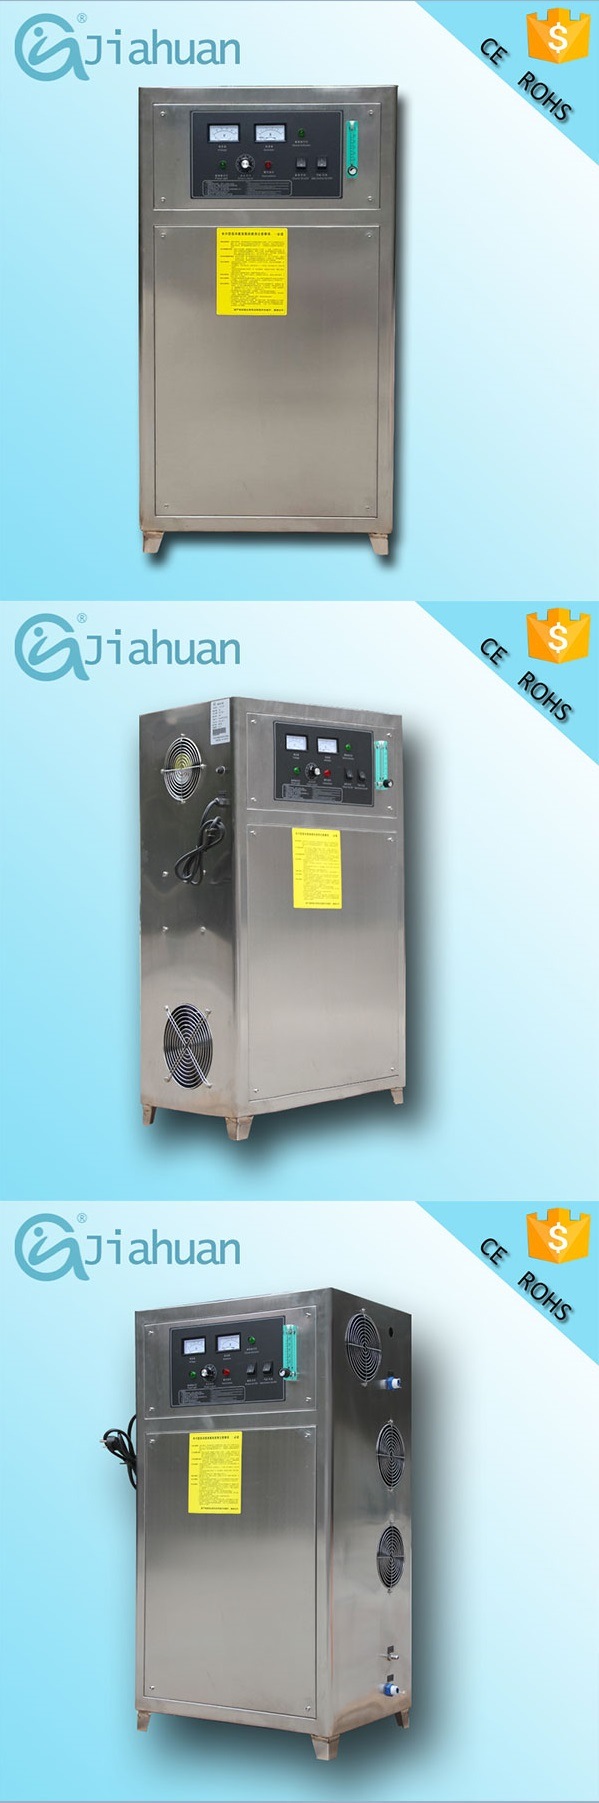 Cooling Tower Water Disinfection and Sterilizer Ozonator